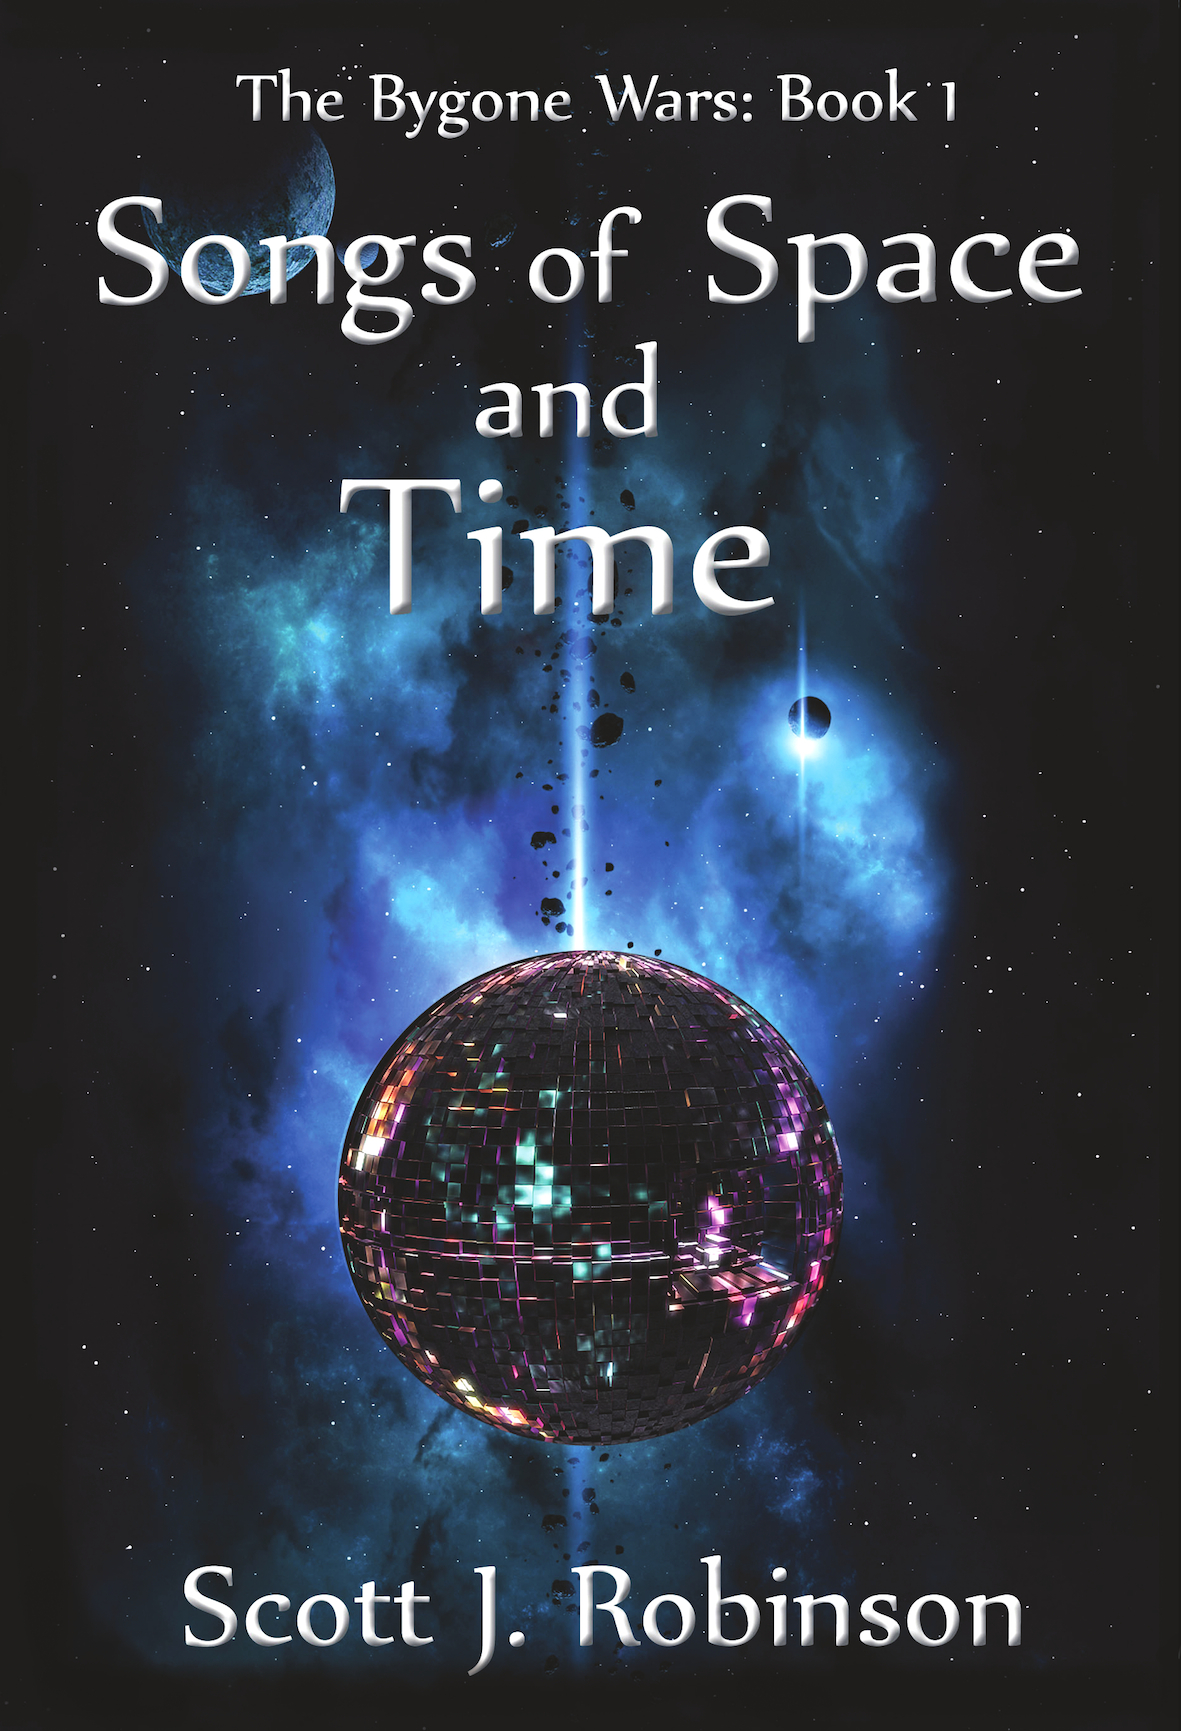 FREE: Songs of Space and Time by Scott J Robinson